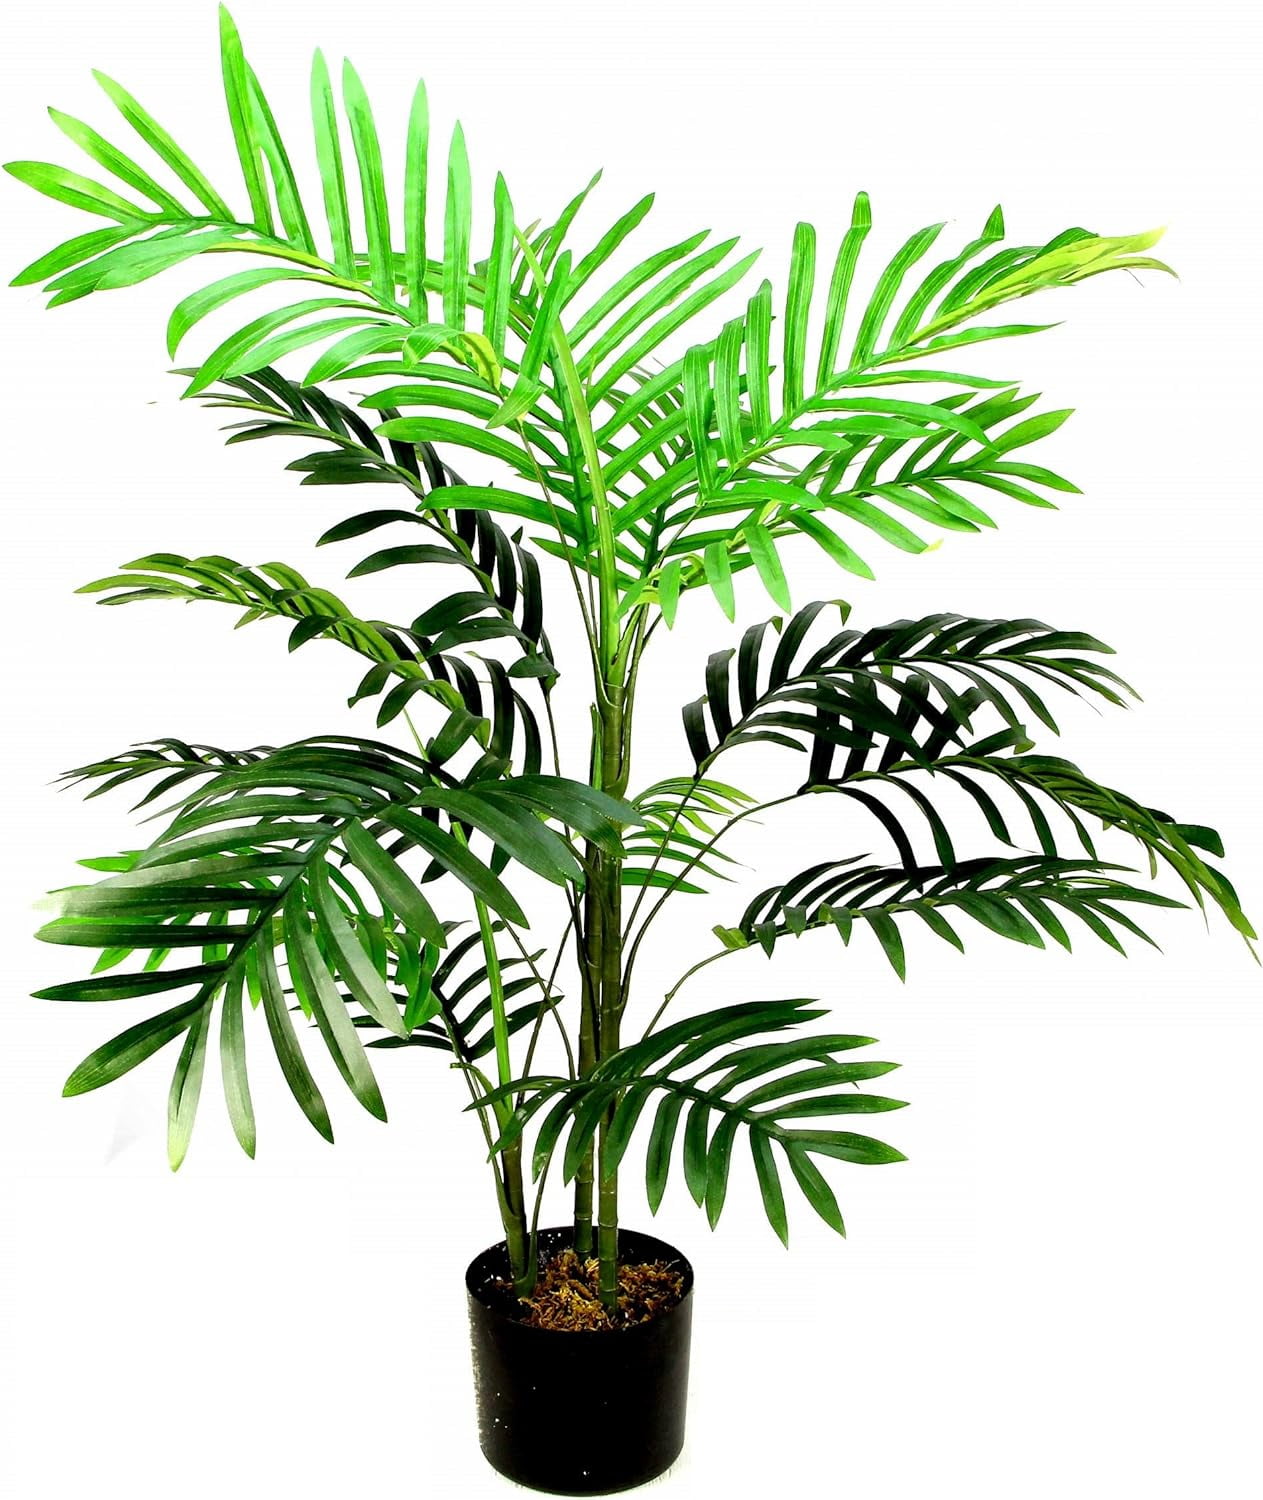 SIGNWIN Floor Plants Artificial Areca Palm Trees for Home, Fake Palm Plant with Vase - Large Size 80 Overall